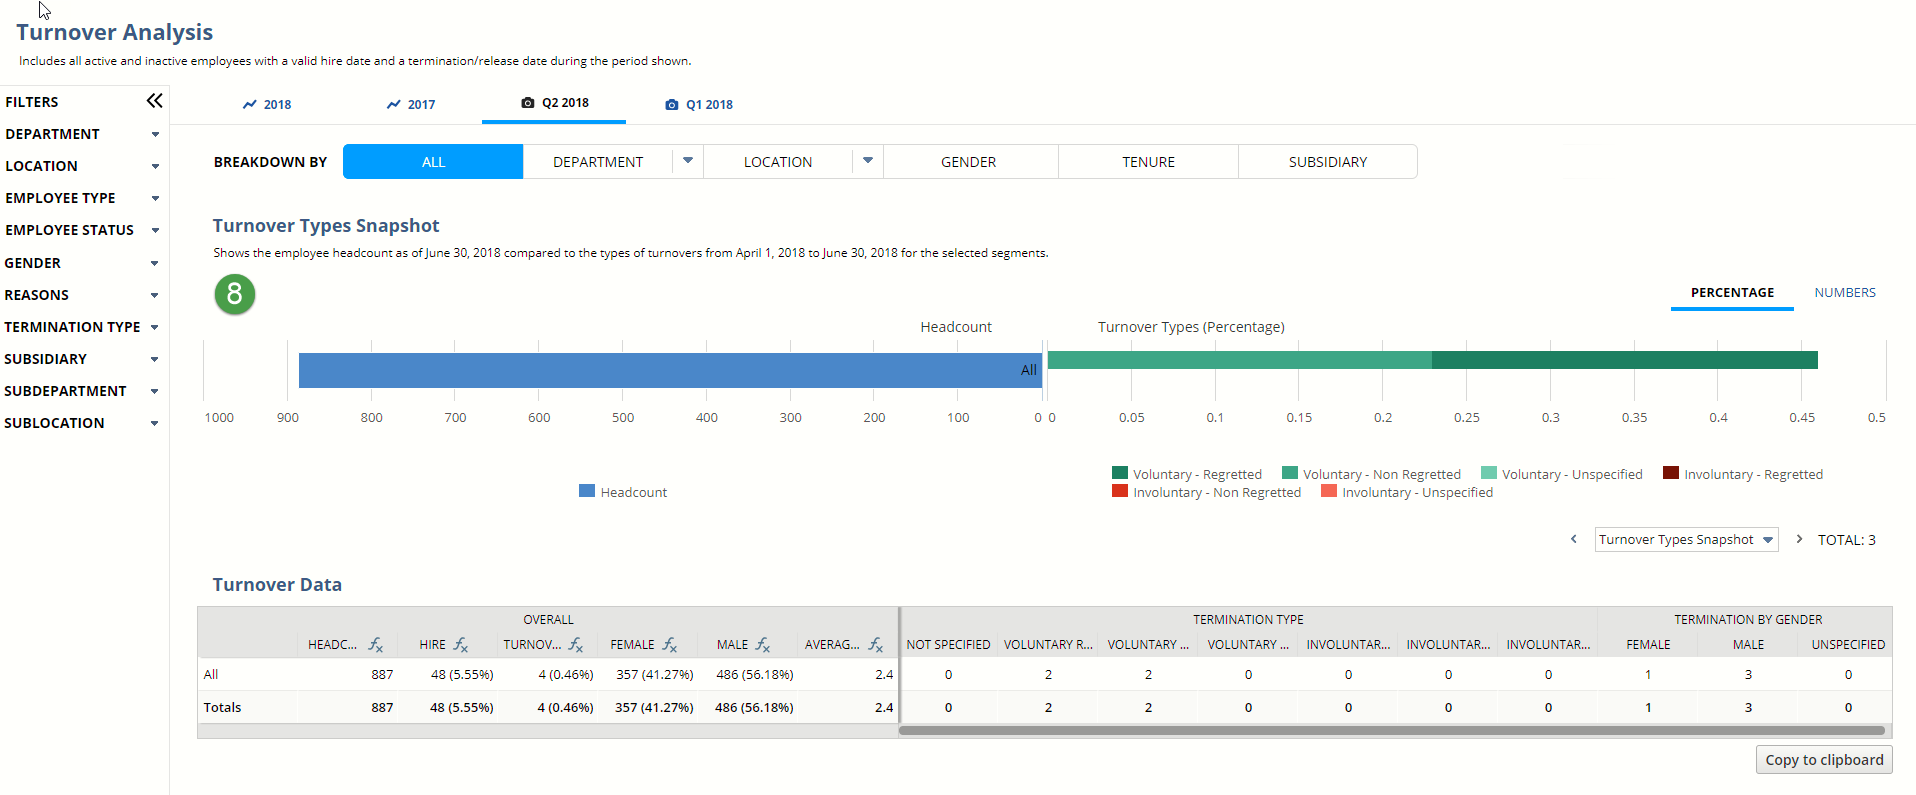 Screenshot of the turnover types snapshot graph and turnover data table. Callout eight points to the graph.